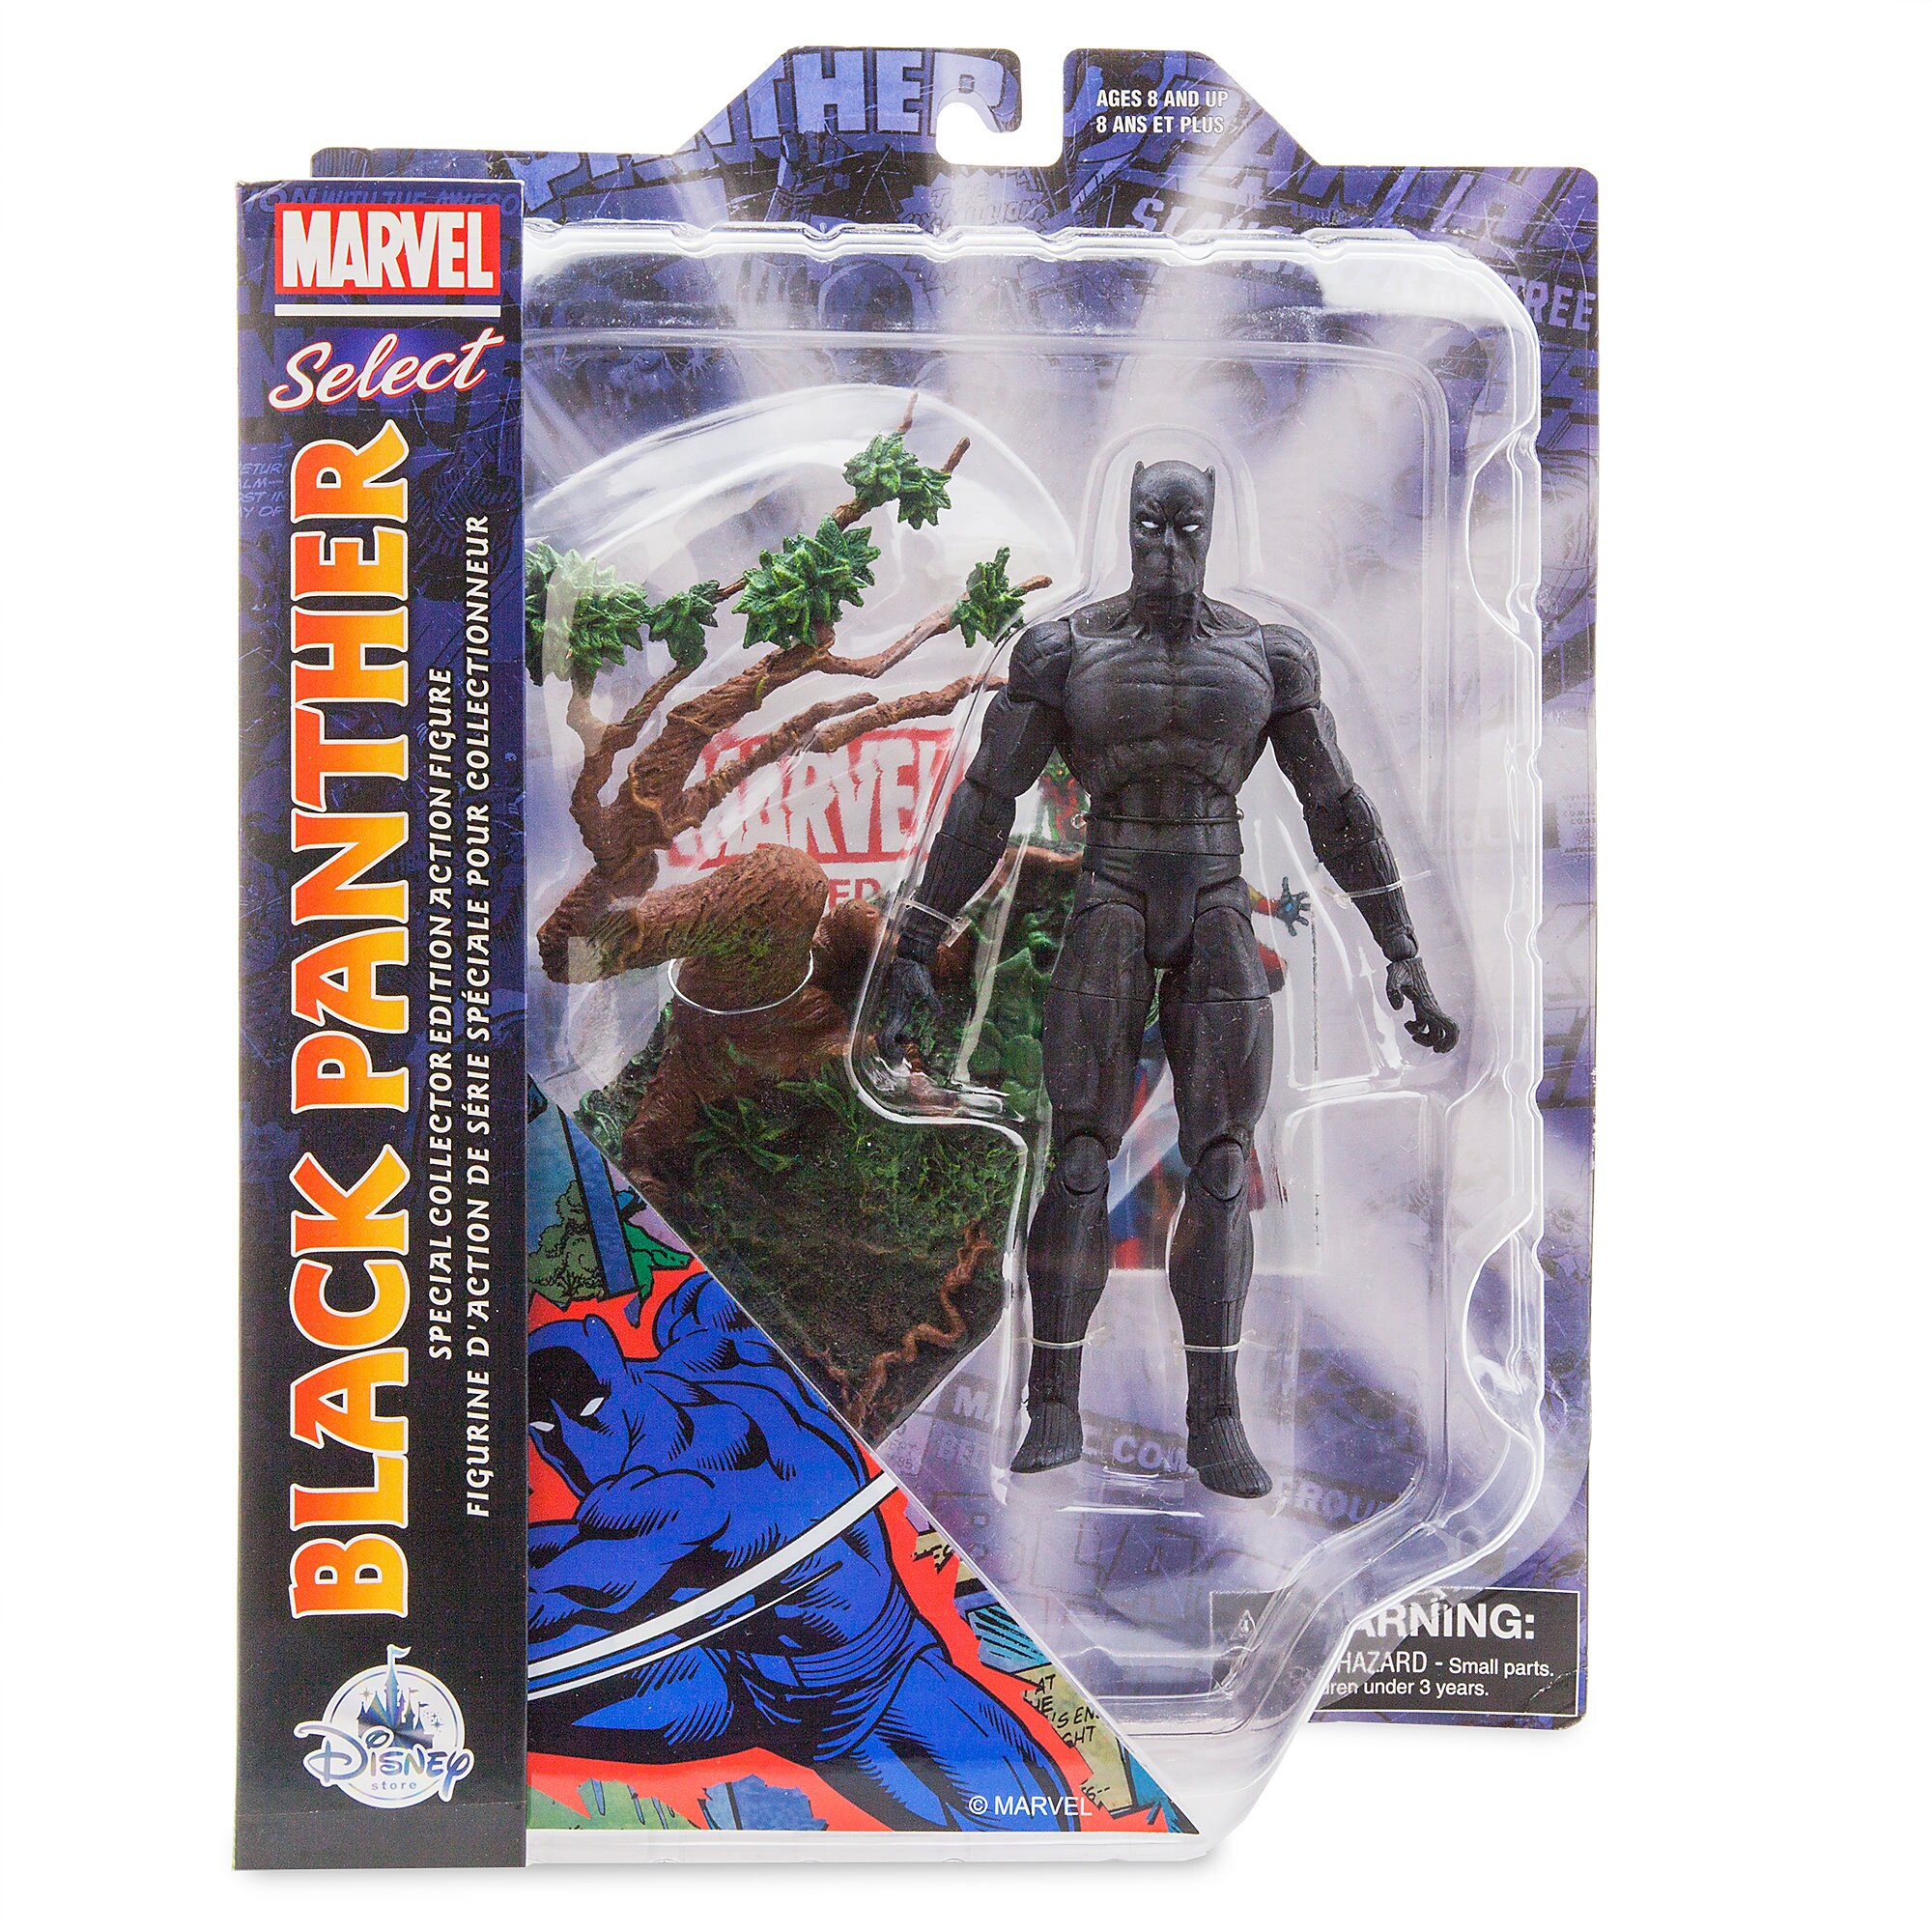 Black Panther Action Figure by Marvel Select - 7''